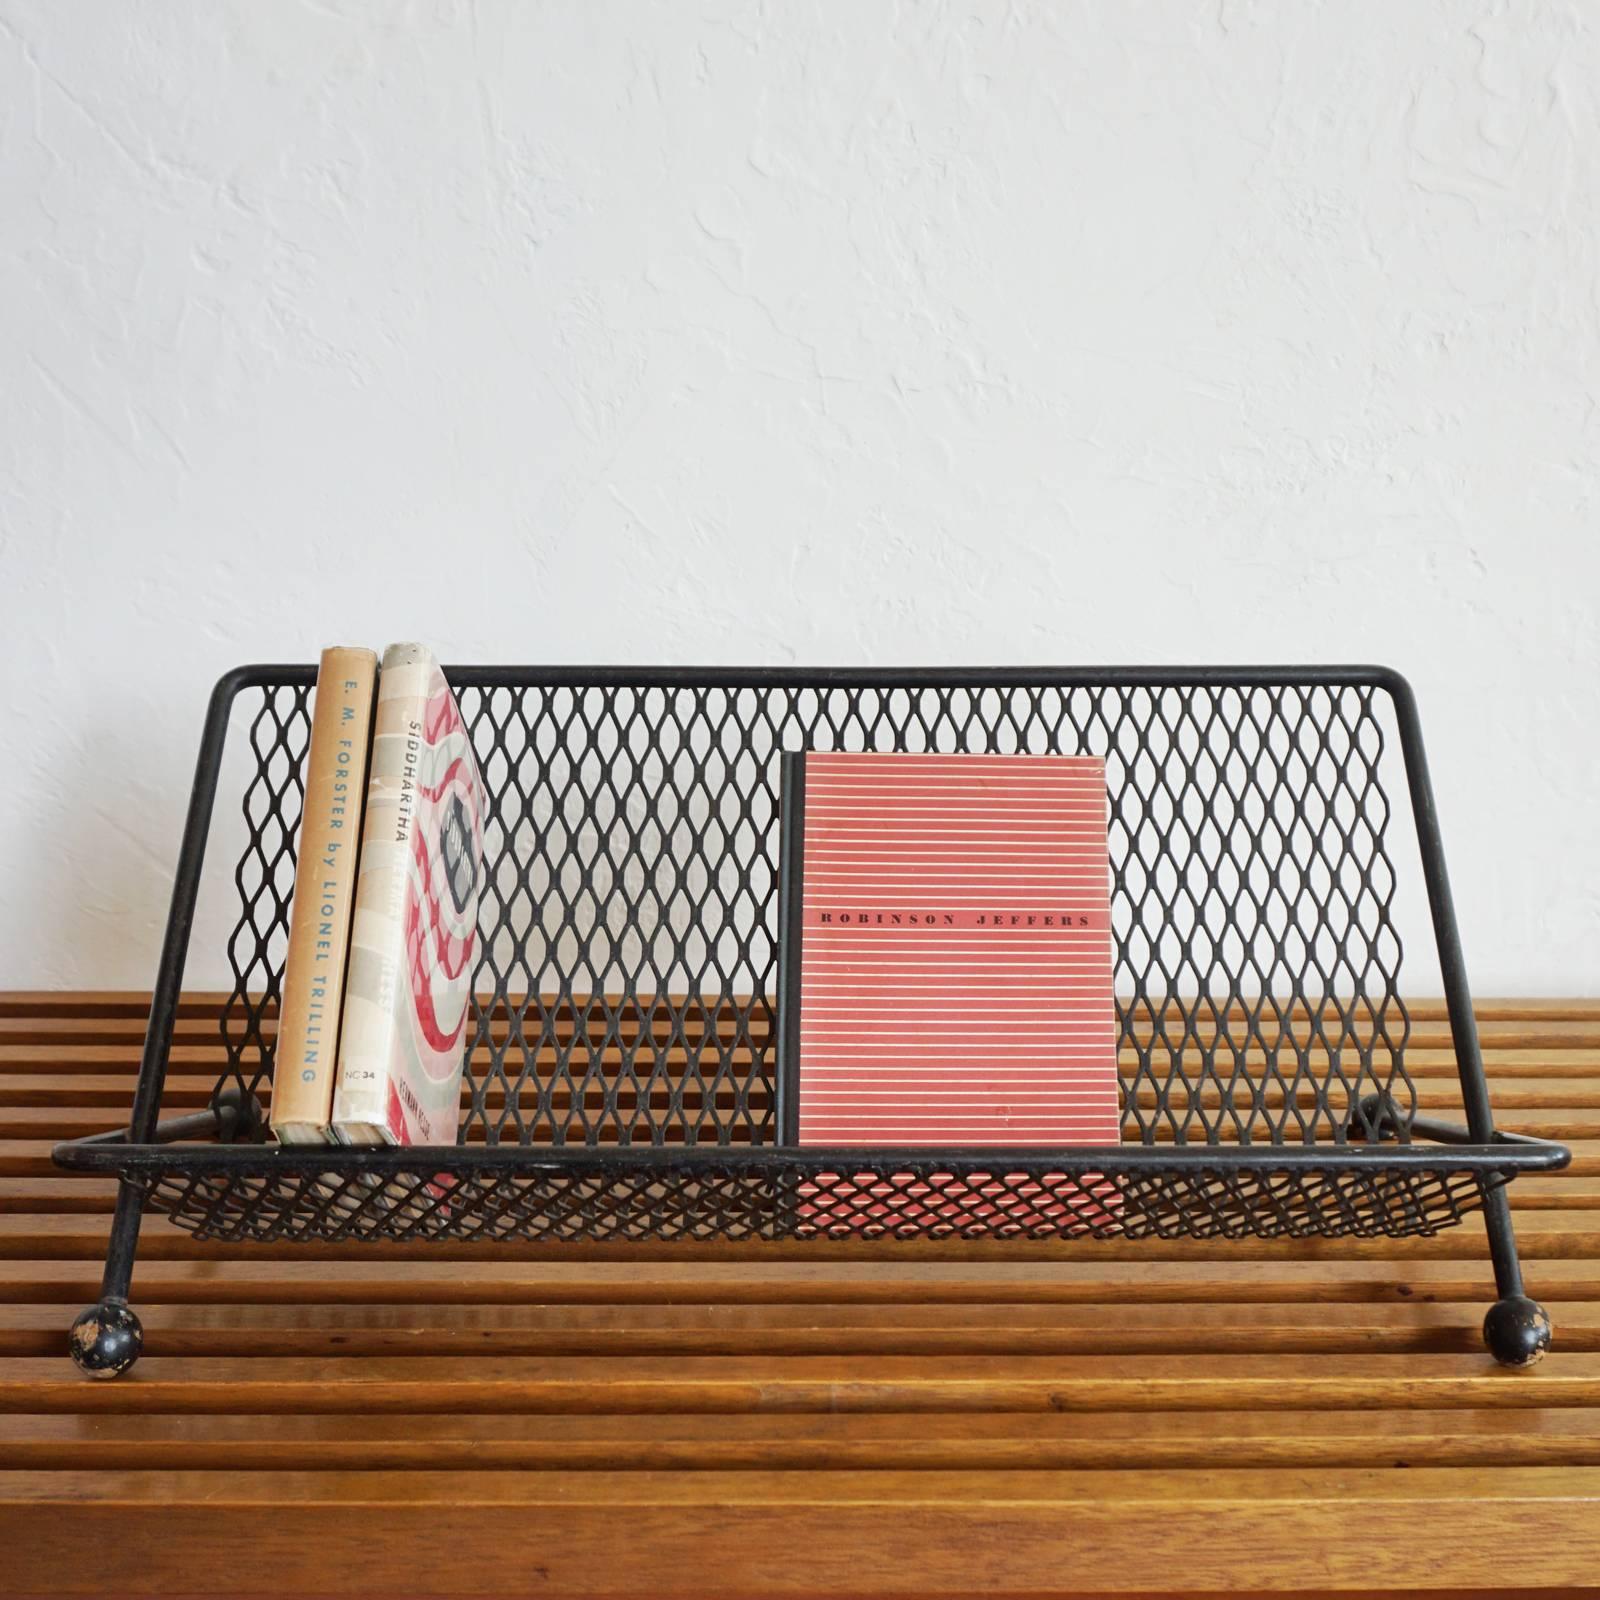 1950s expanded metal book stand with wood ball feet.